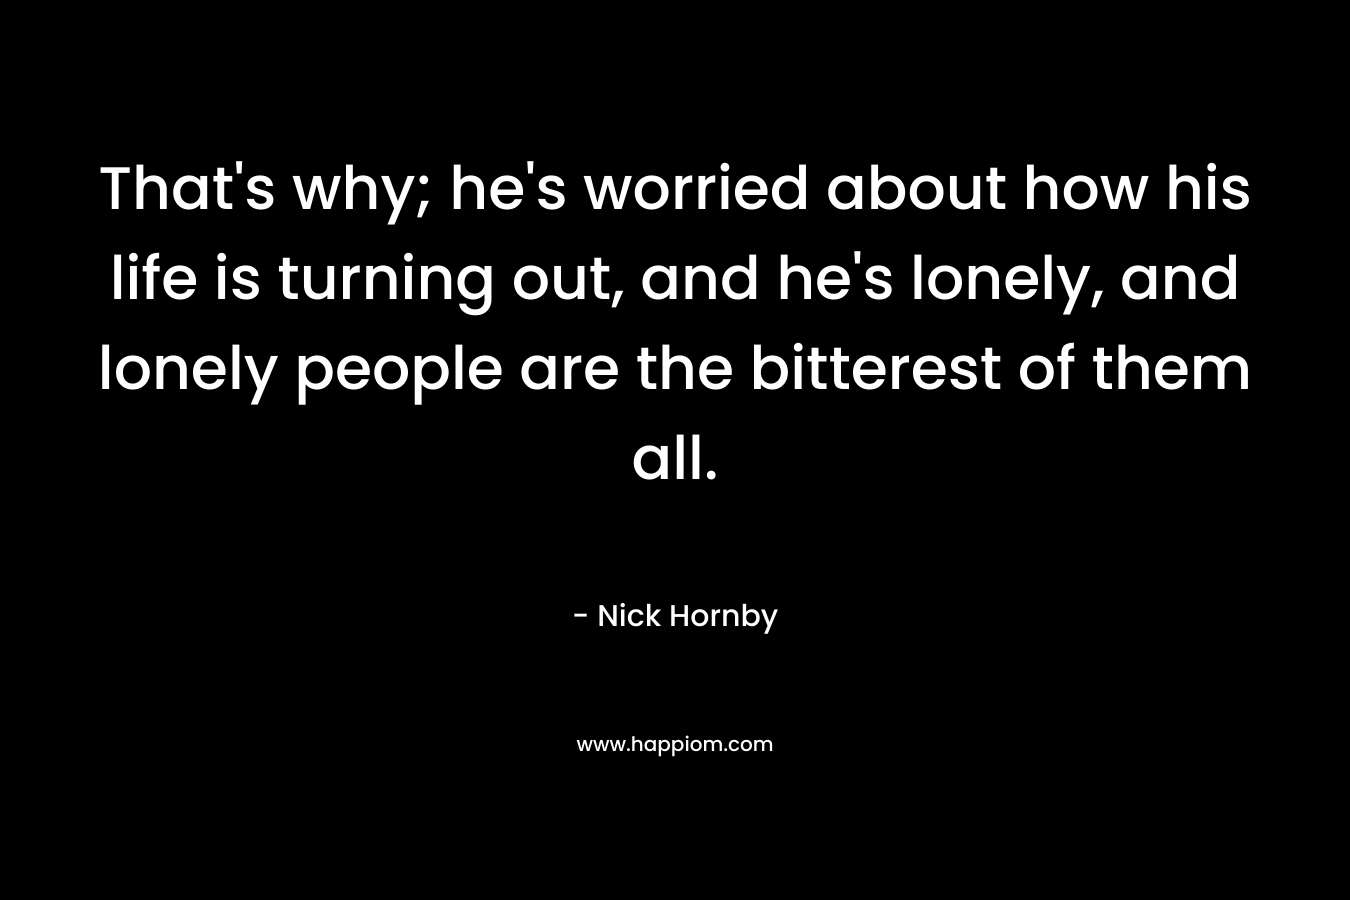 That's why; he's worried about how his life is turning out, and he's lonely, and lonely people are the bitterest of them all.